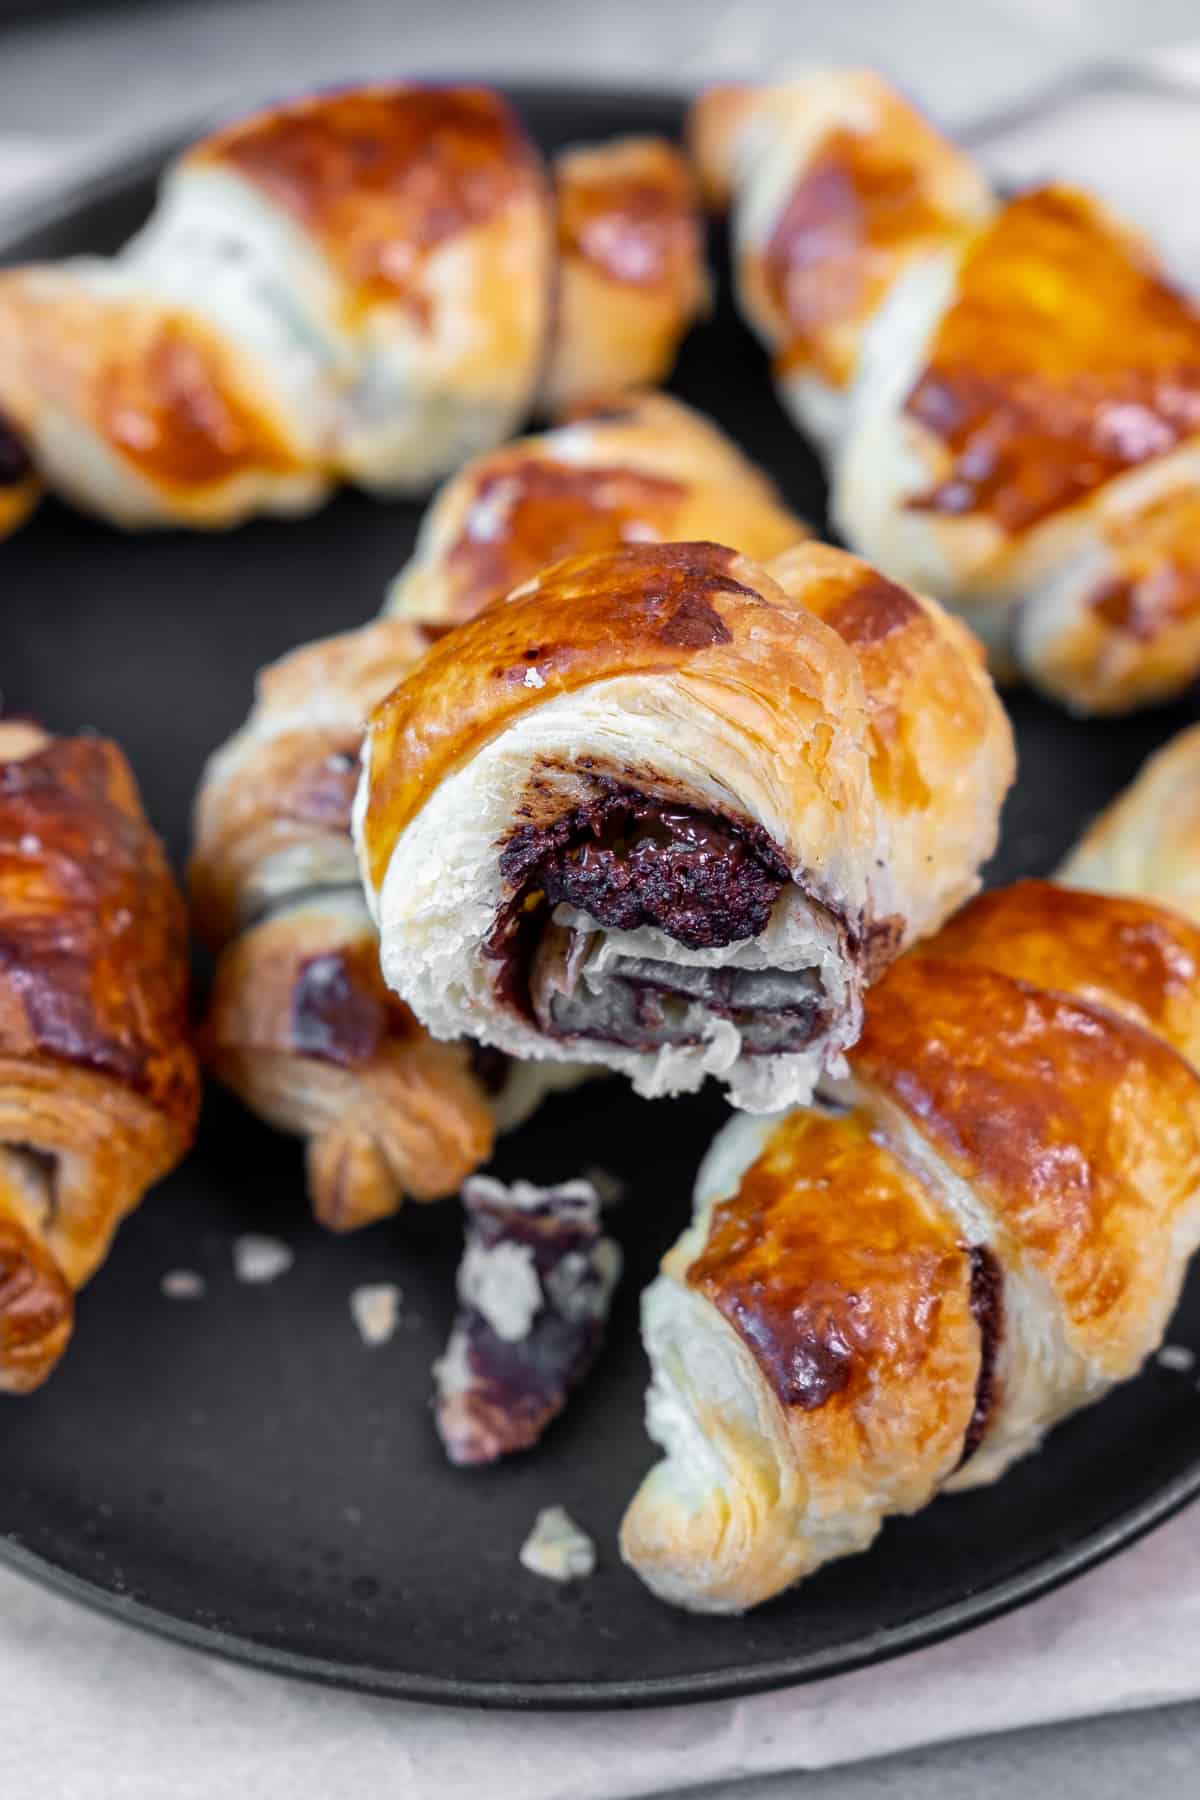 Chocolate filled puff pastry rolls on a black plate. The chocolate filling inside is shown.